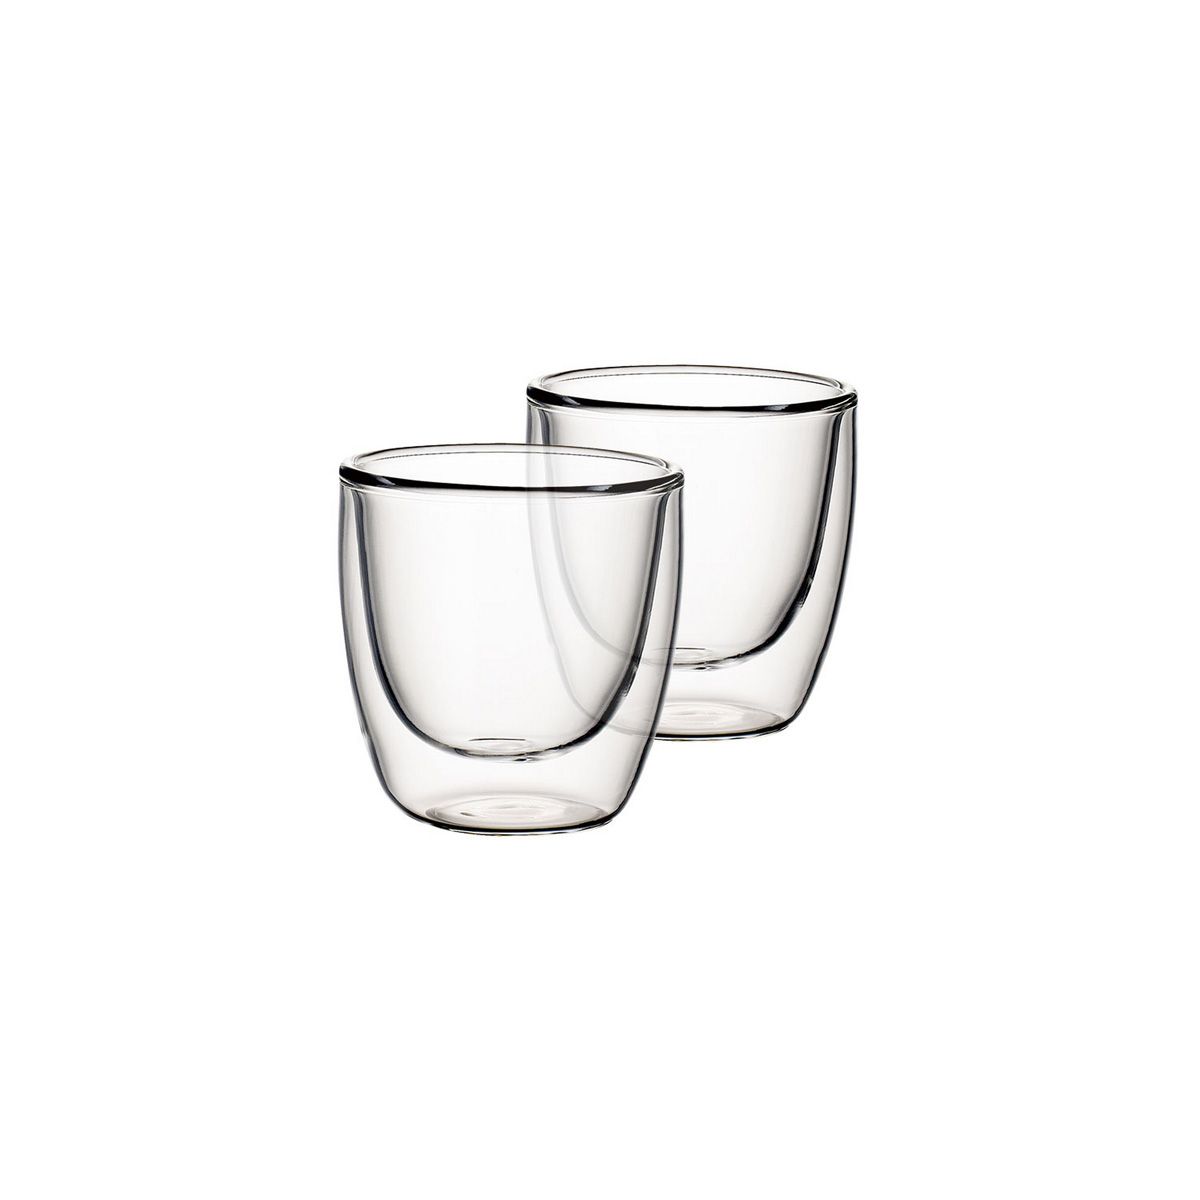 Villeroy and Boch Artesano Hot Beverages Tumbler Small Pair